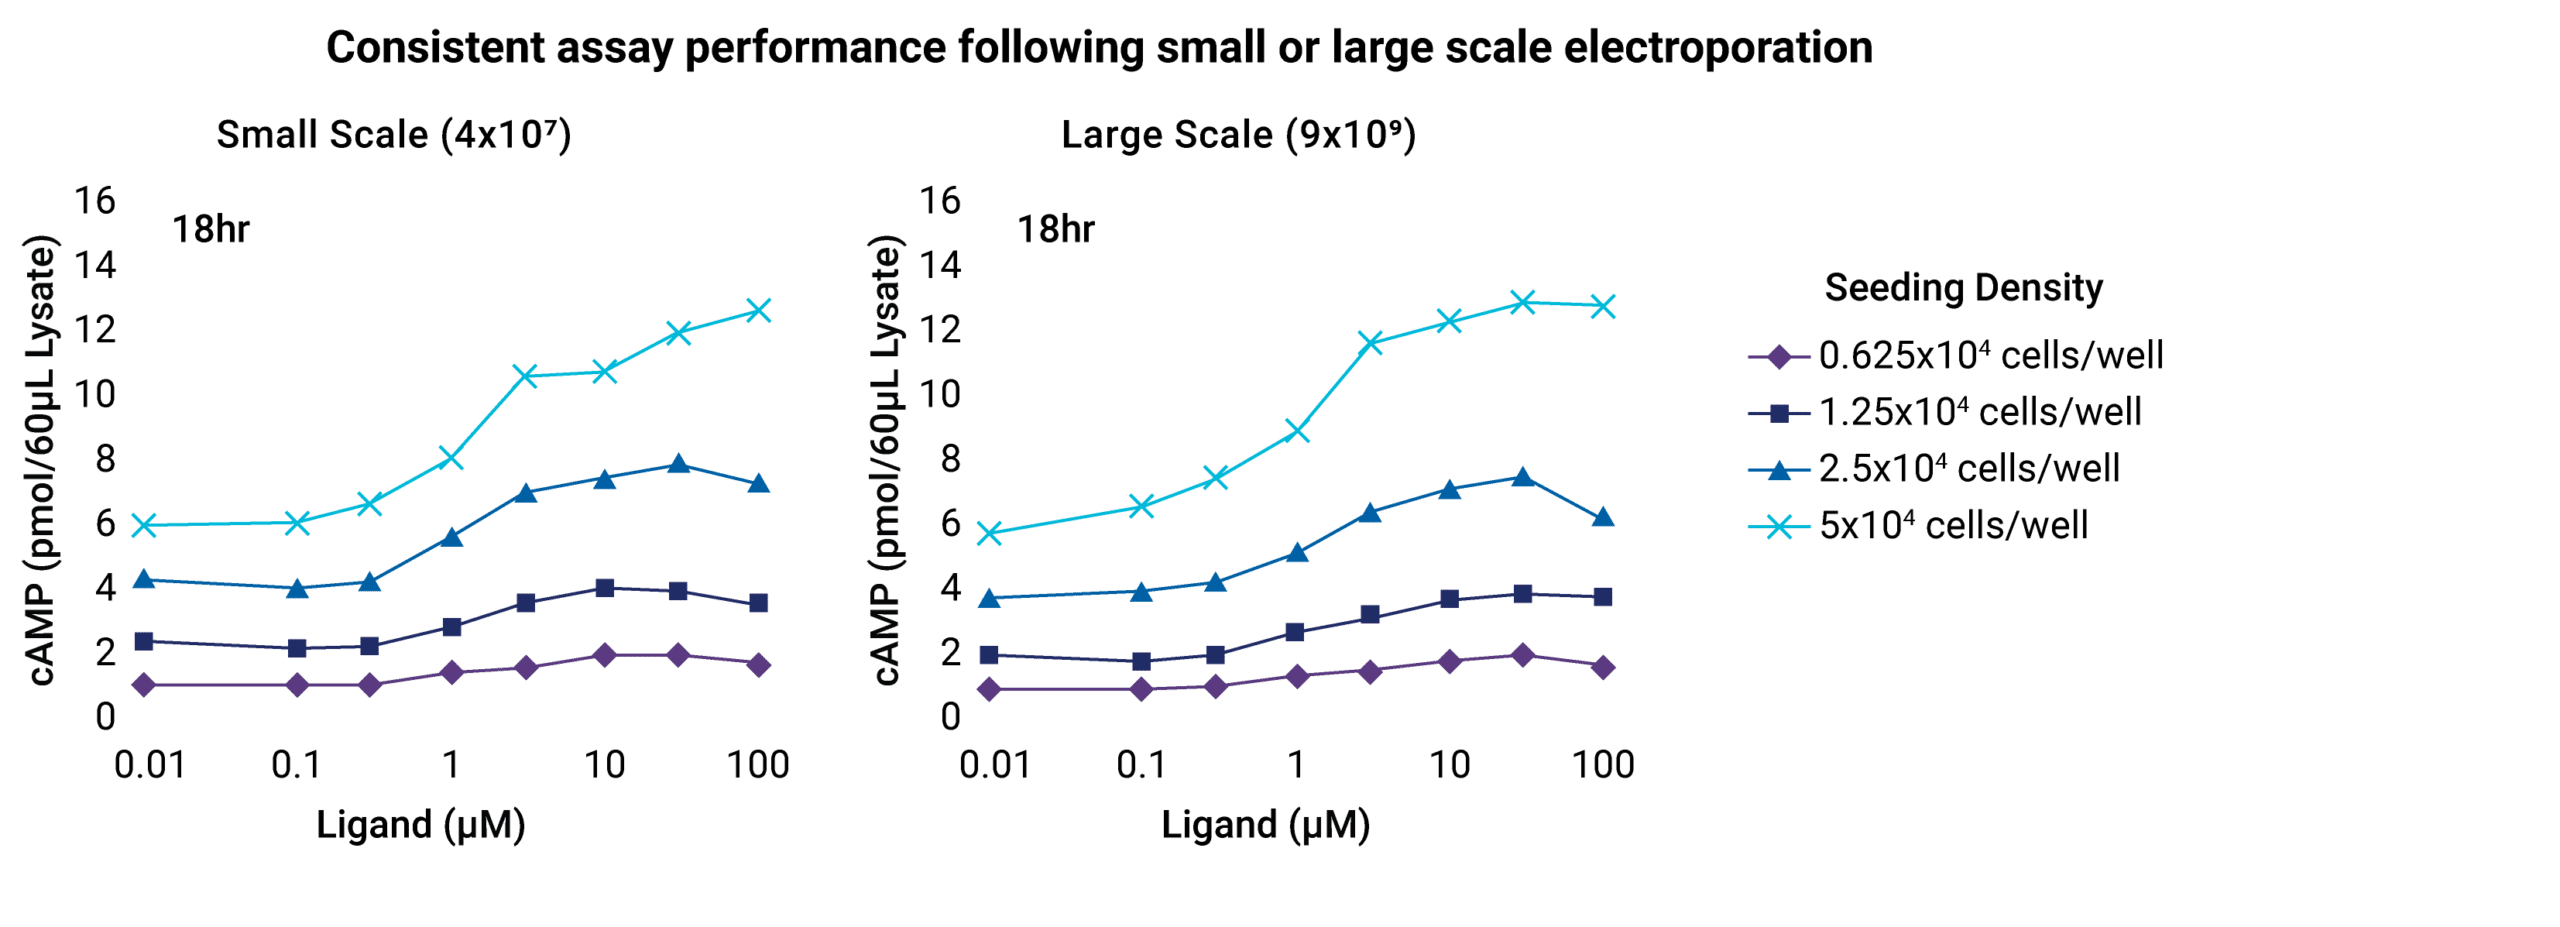 Consistent assay performance following small or large scale cell based assay